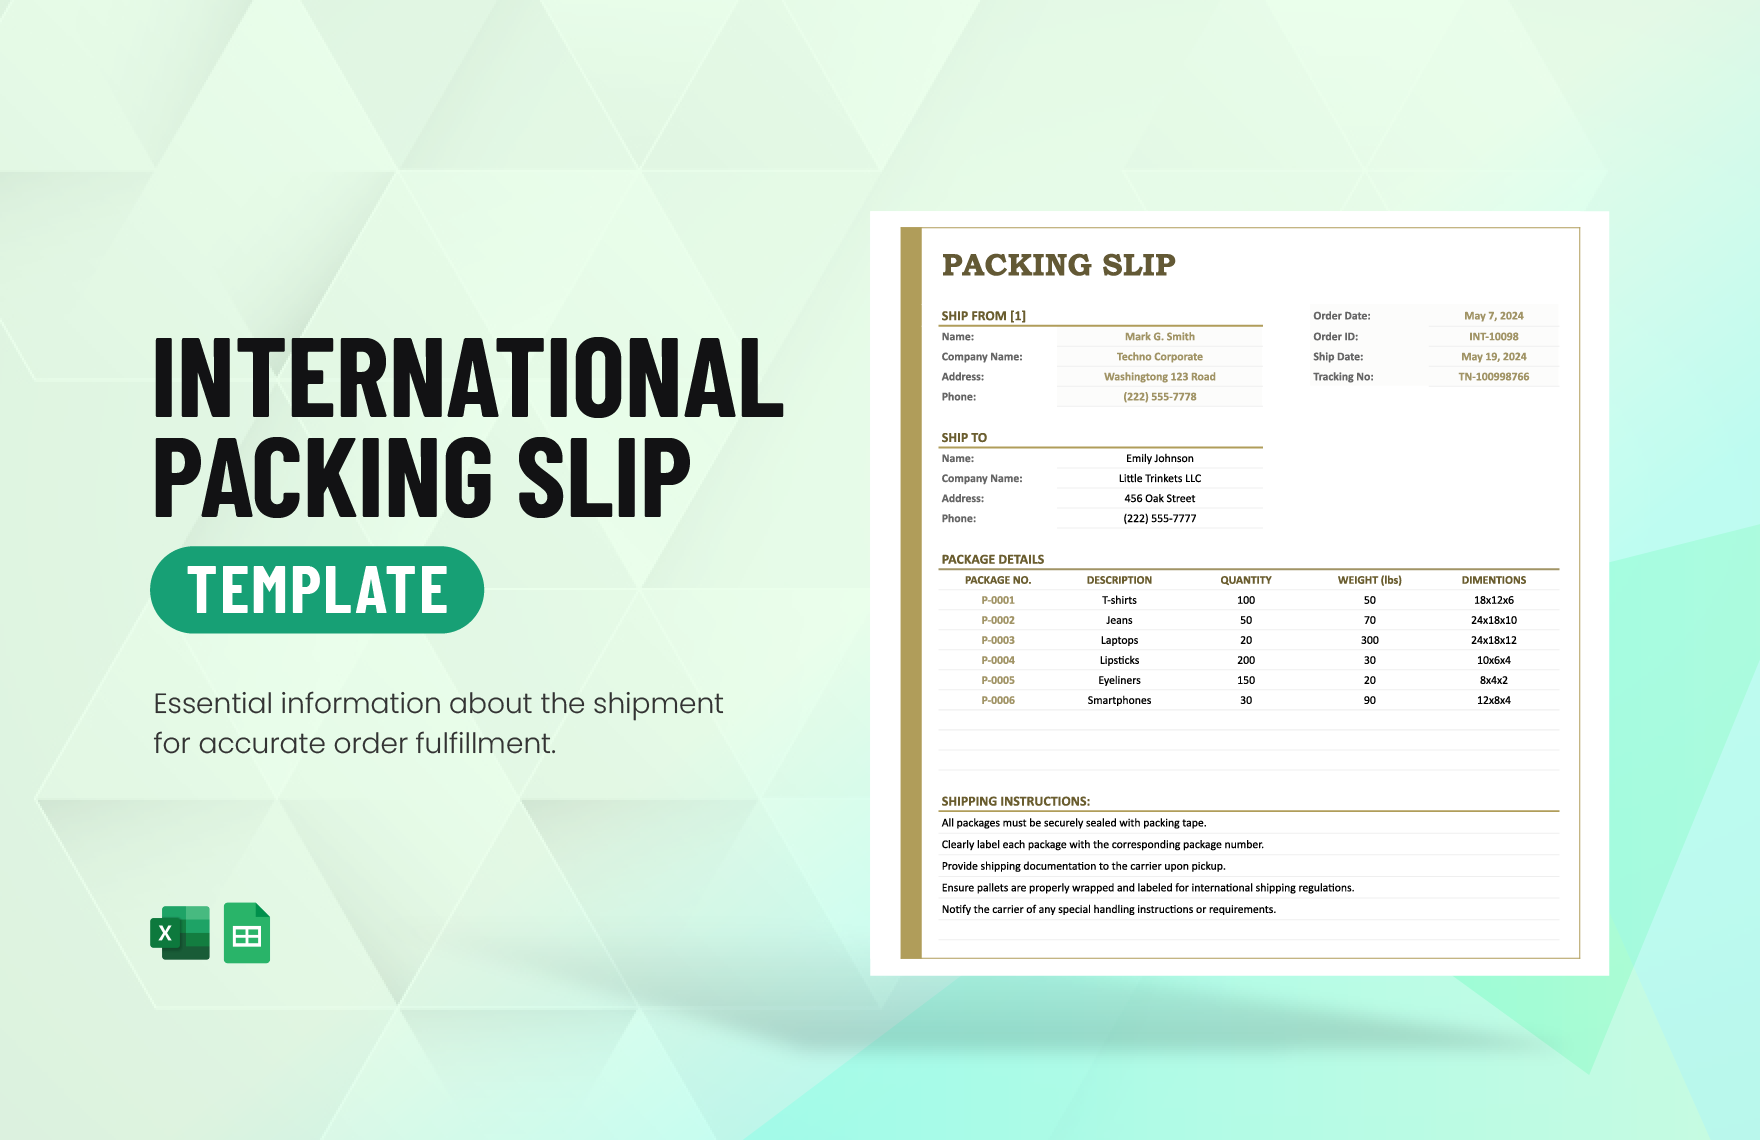 International Packing Slip Template in Excel, Google Sheets